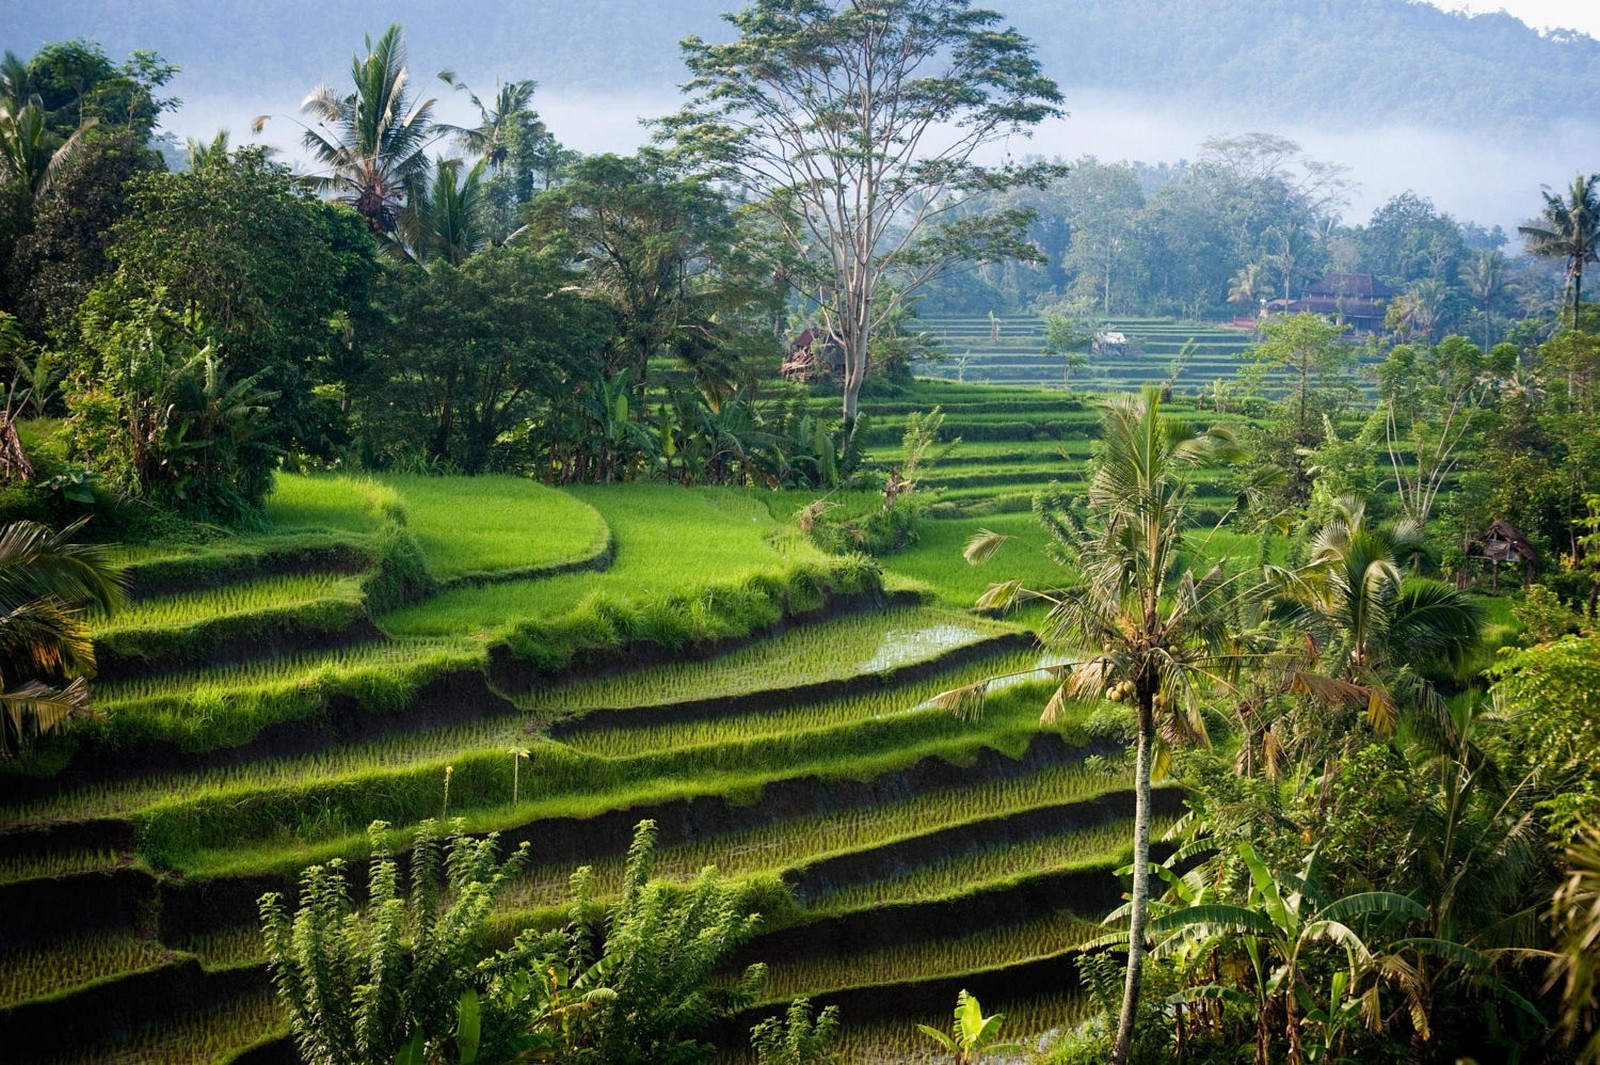 nature, Landscape, Photography, Morning, Sunlight, Rice Paddy, Palm Trees, Shrubs, Hills, Green, Bali, Indonesia, Terraced Field Wallpaper